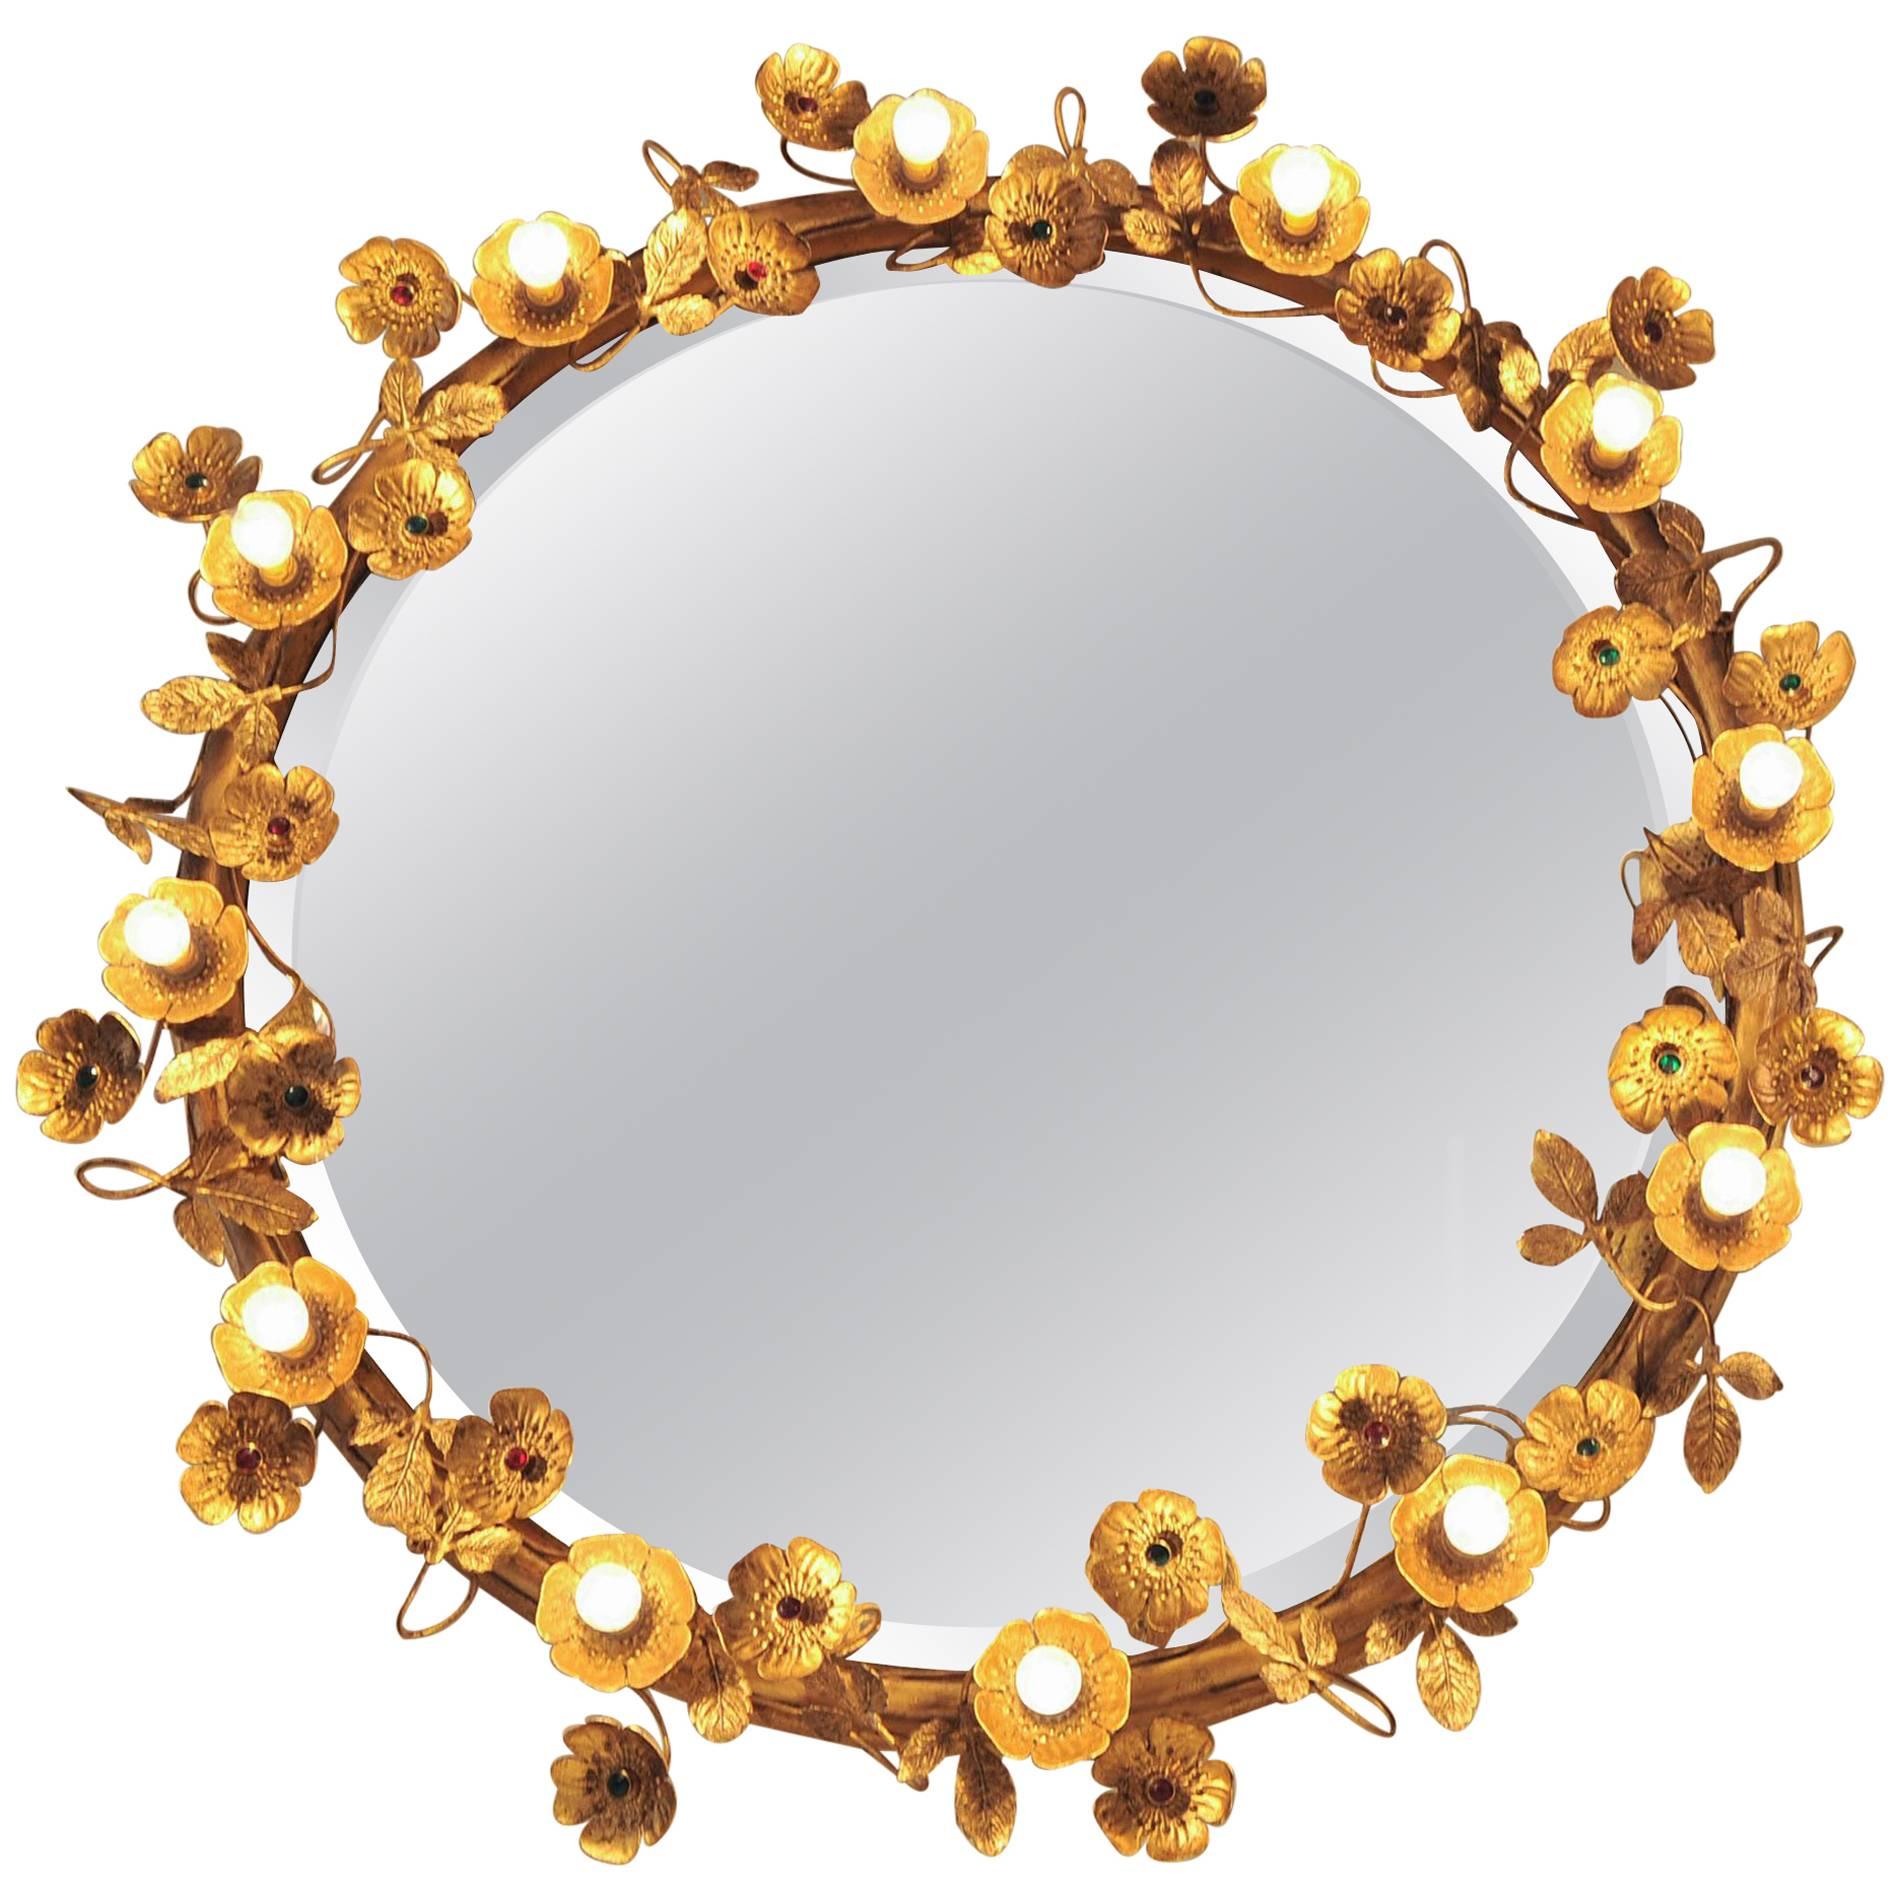 Super glamorous contemporary wall mirror from the VW collection that comprises of delicate gold brass flowers and leaves that encircle the beveled mirror. Each flower is finished with a ruby or emerald centre unless it holds one of the small